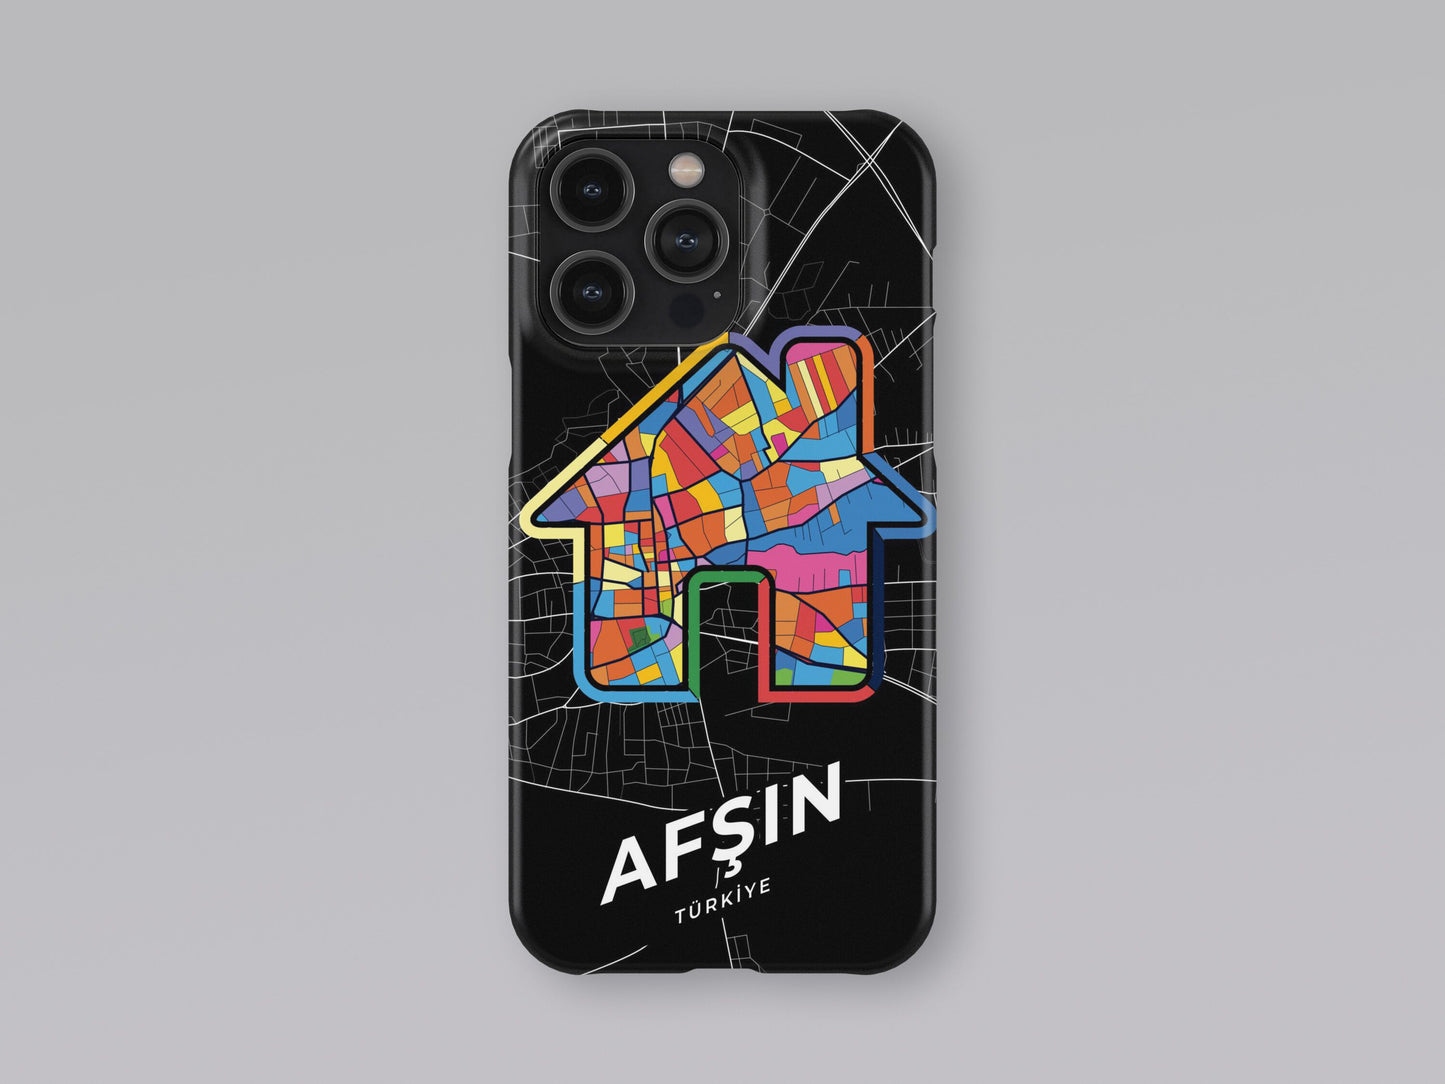 Afşin Turkey slim phone case with colorful icon. Birthday, wedding or housewarming gift. Couple match cases. 3